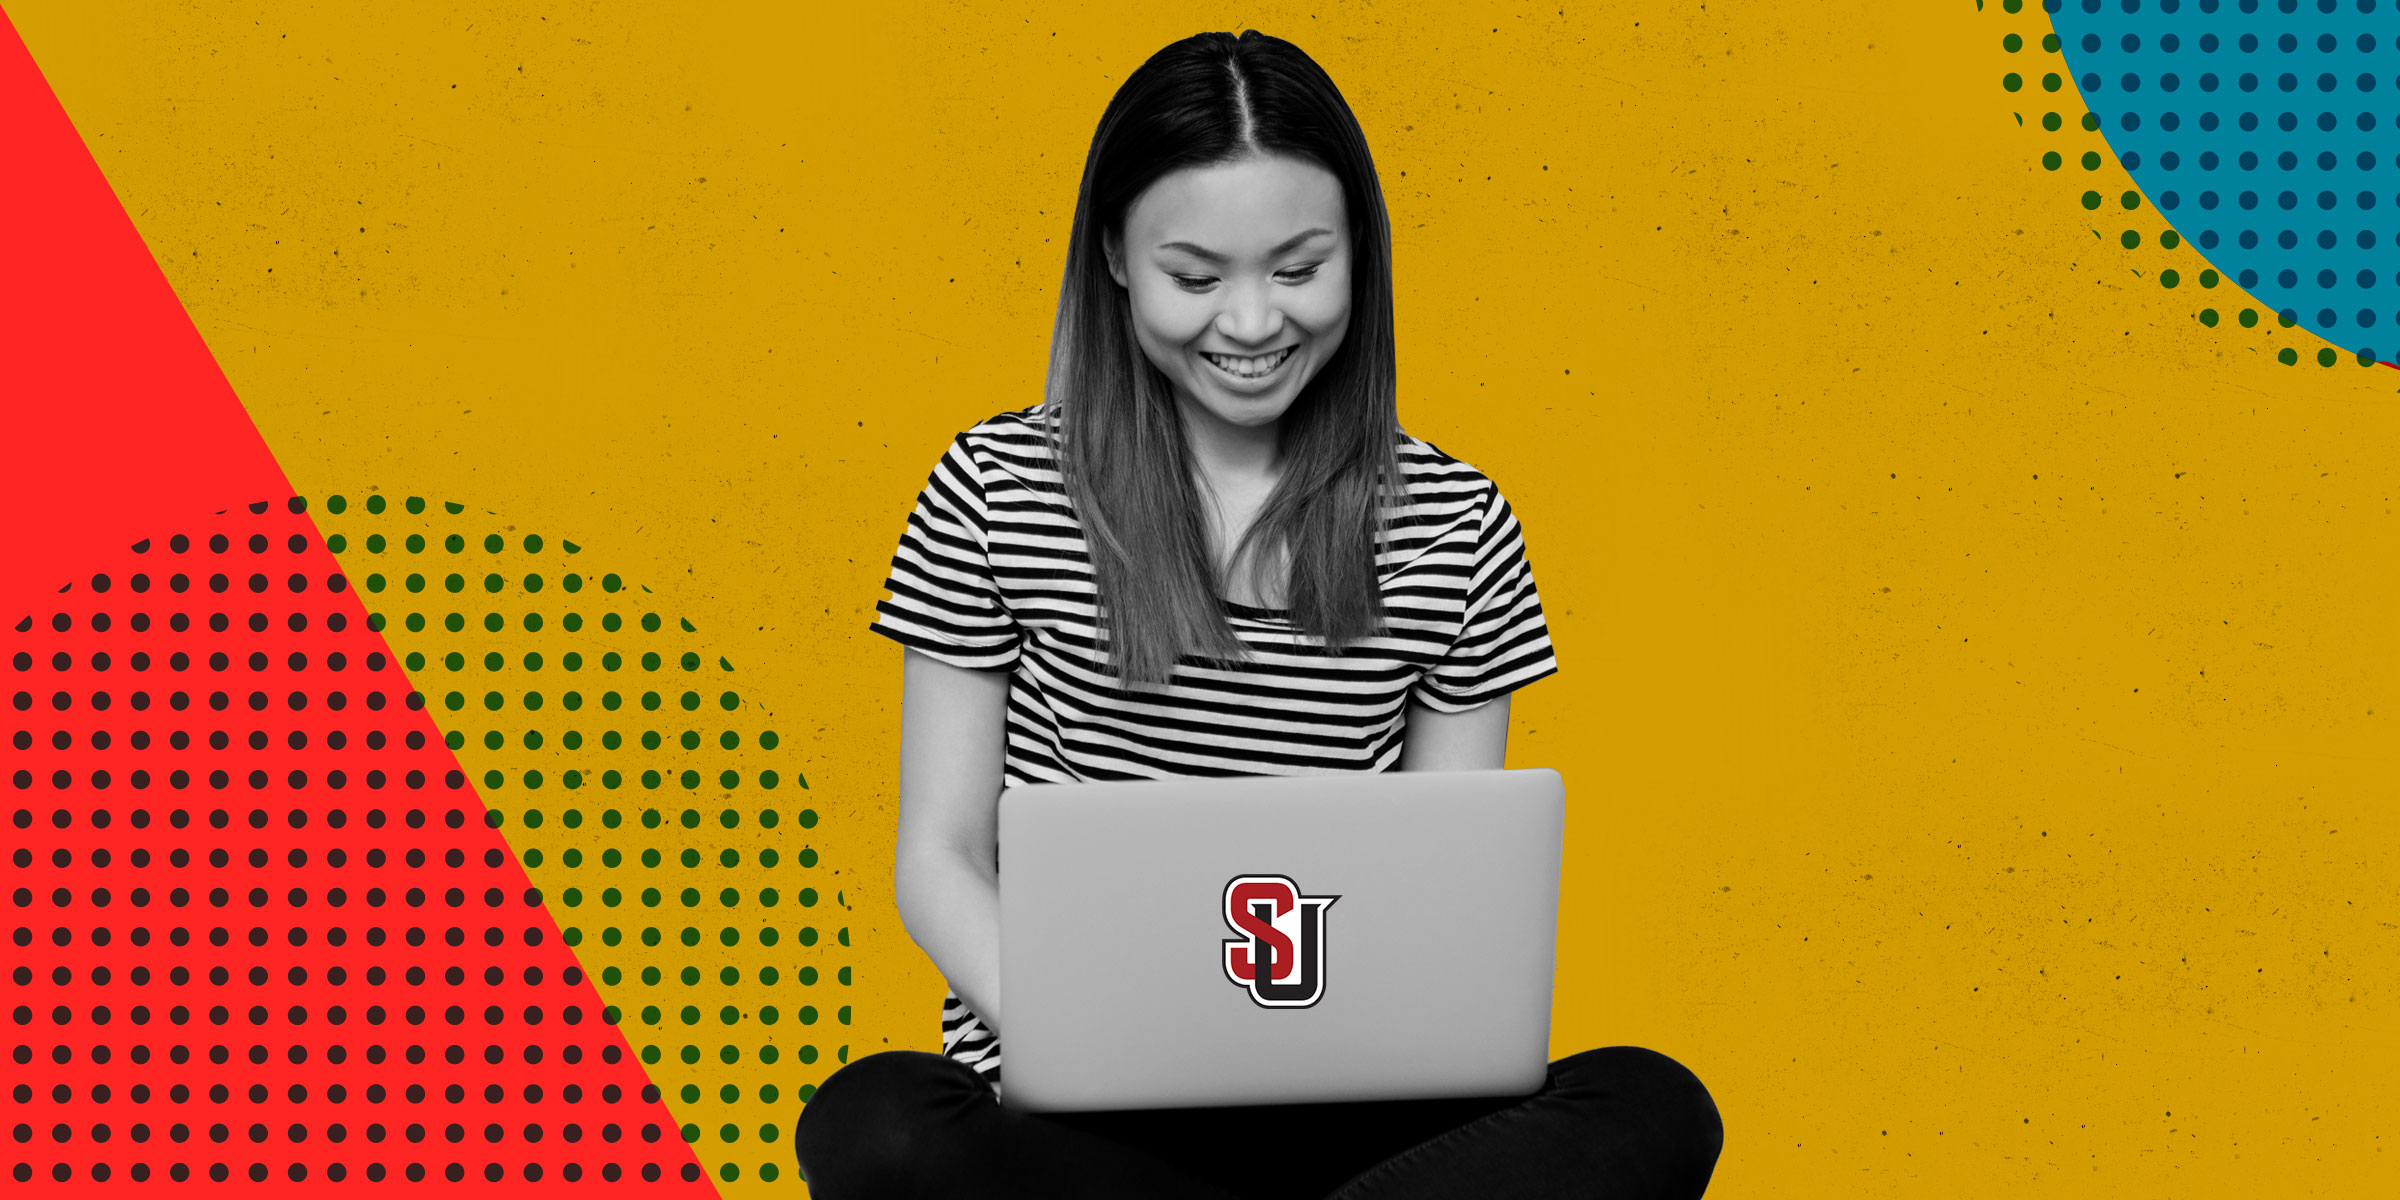 Supporting current students in every possible way remains an important priority for Seattle University.